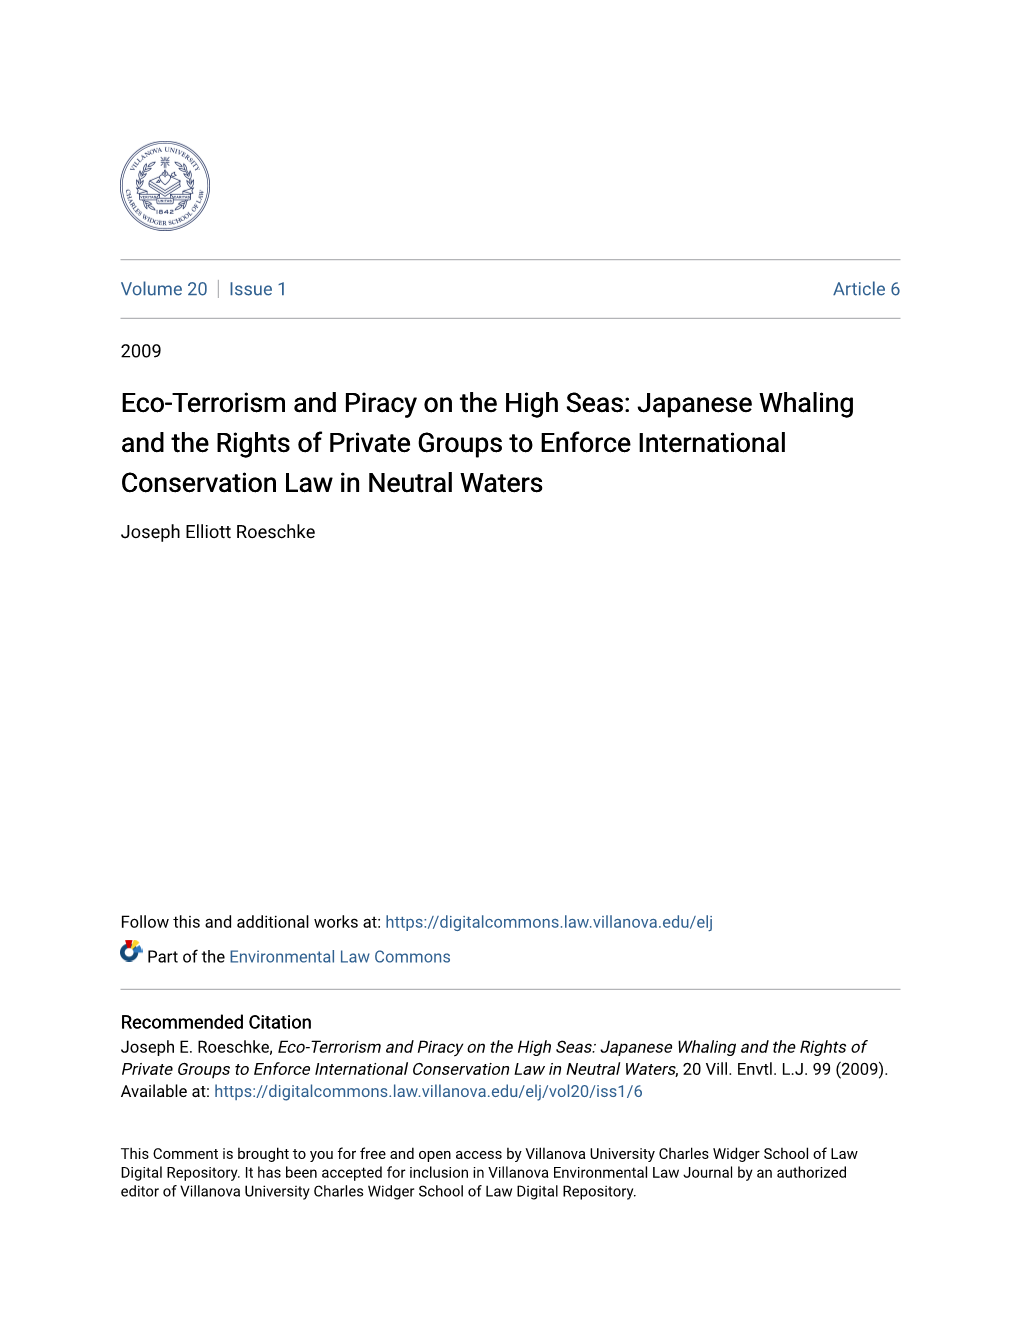 Eco-Terrorism and Piracy on the High Seas: Japanese Whaling and the Rights of Private Groups to Enforce International Conservation Law in Neutral Waters